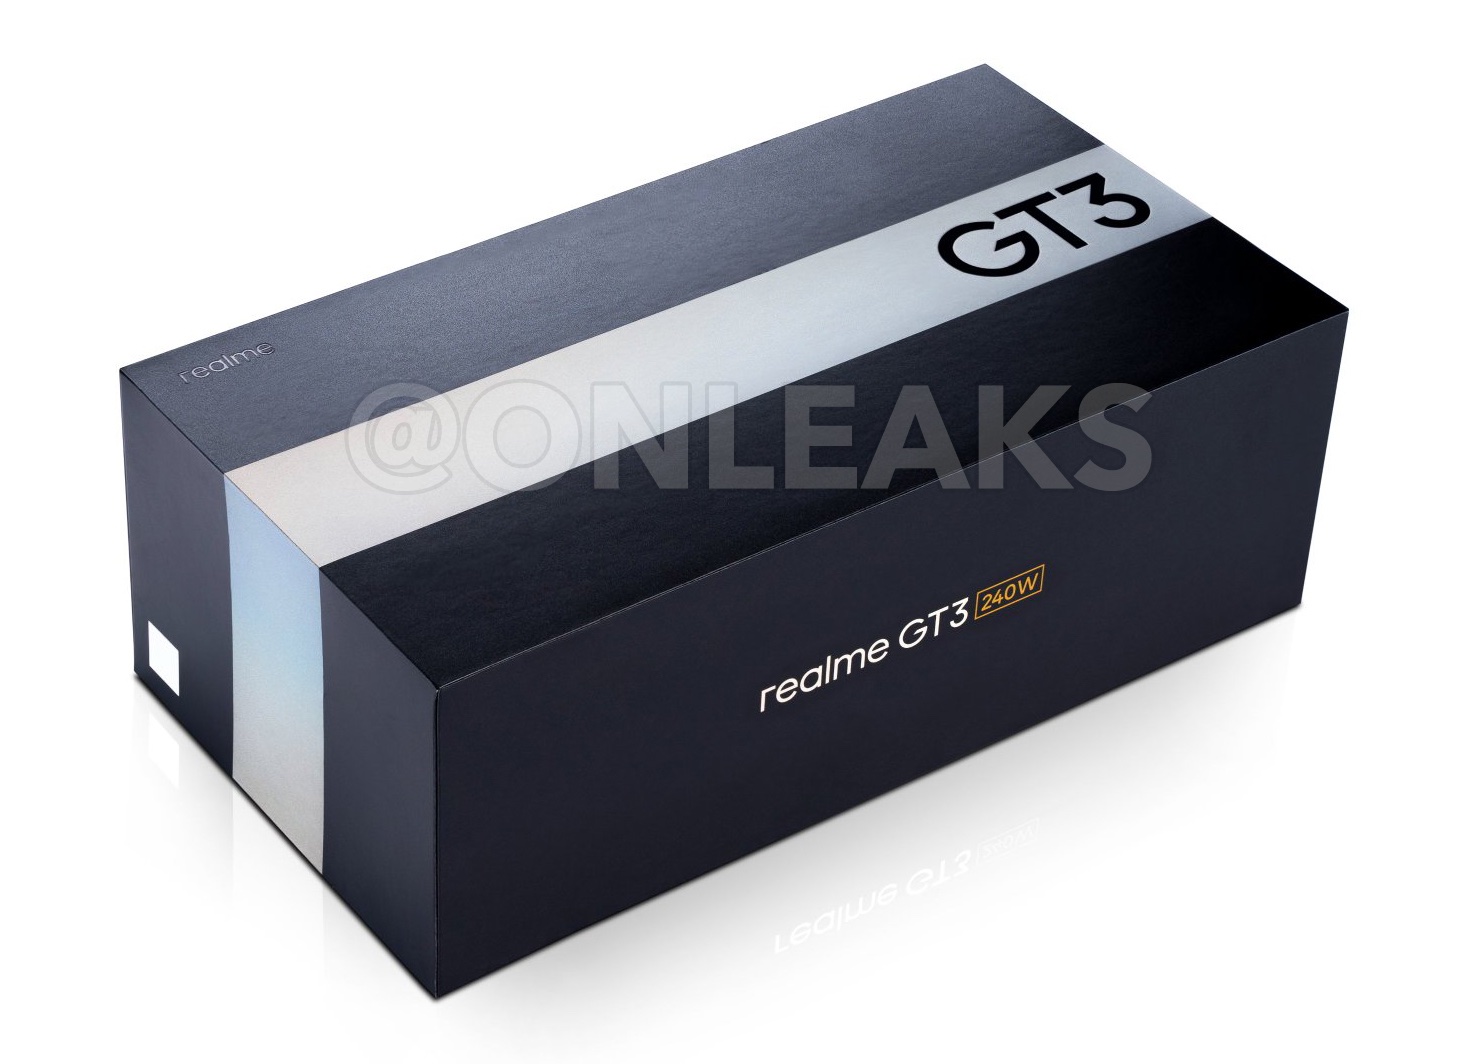 realme GT3 box surfaces revealing 240W fast charging